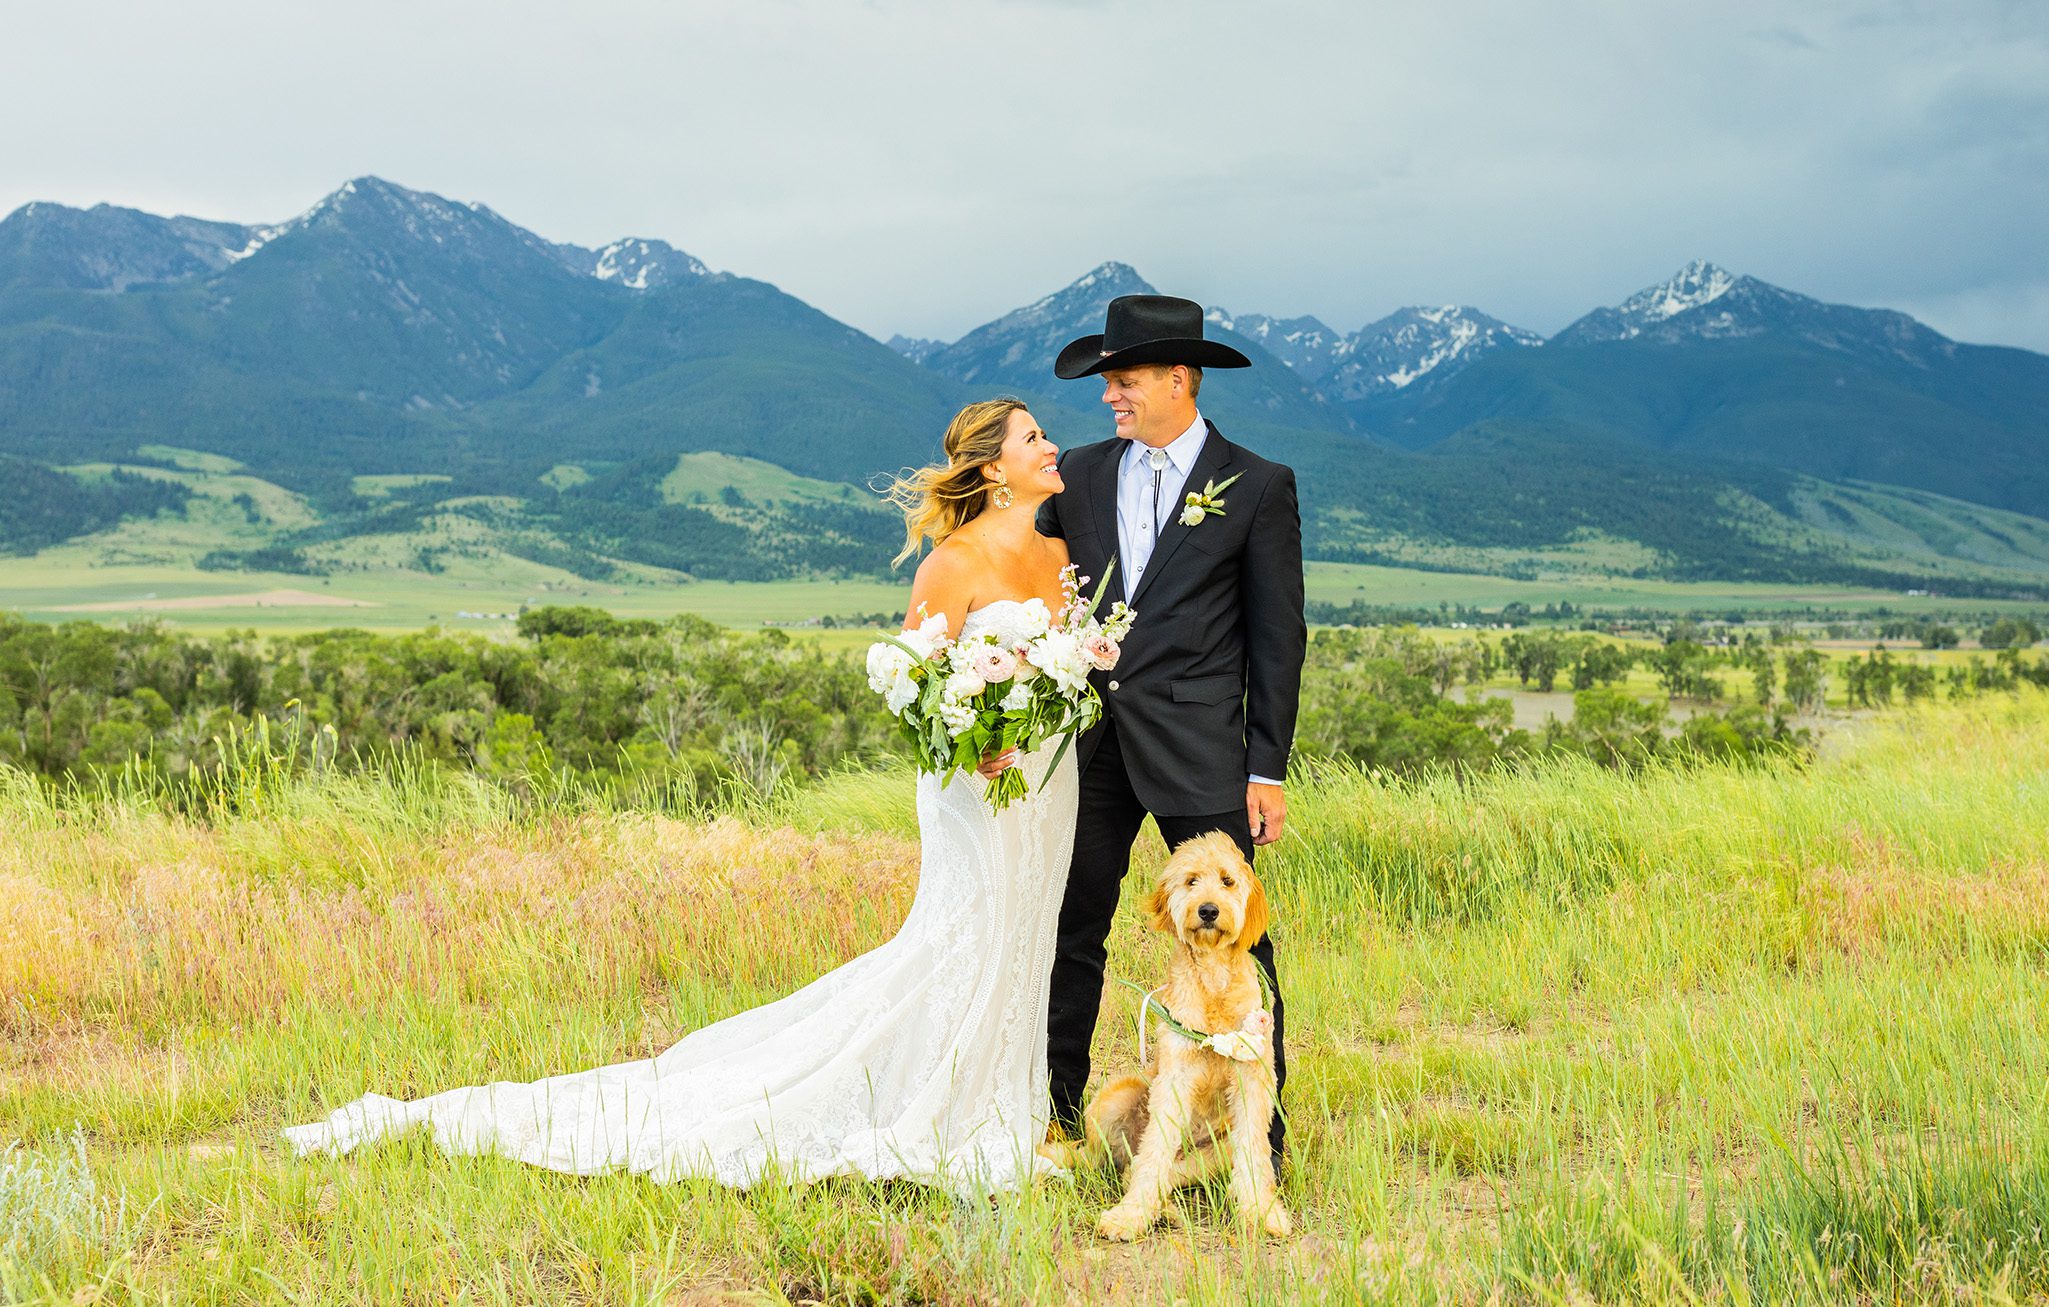 Mountainside elopement IN MONTANA paradise valley